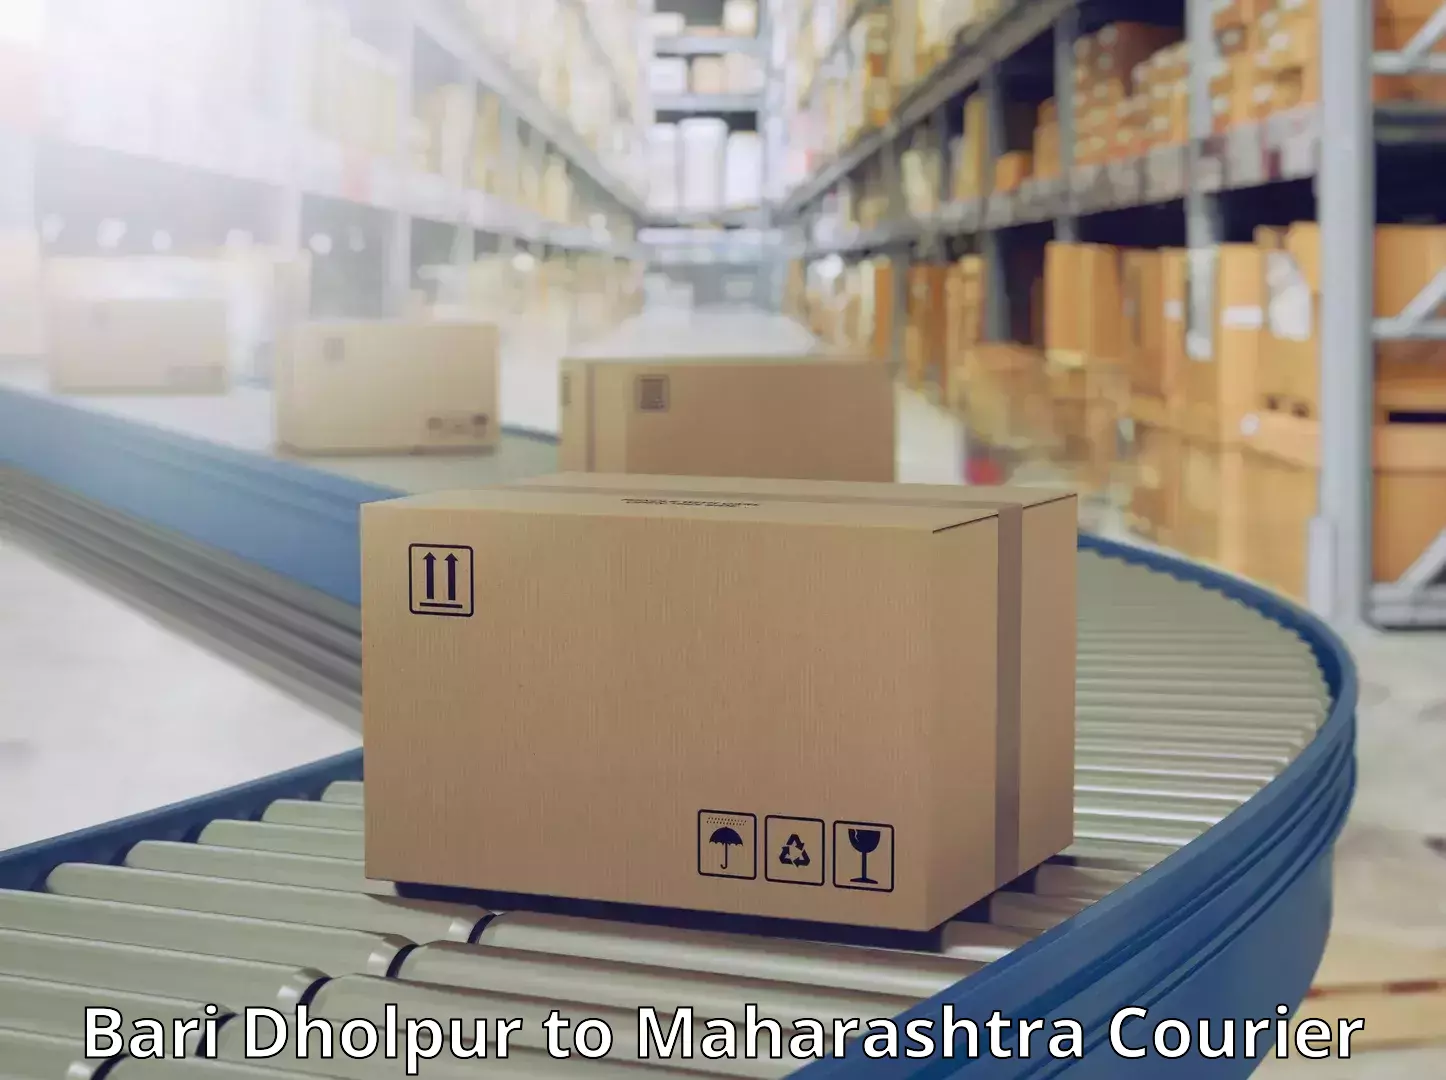 State-of-the-art courier technology Bari Dholpur to Mumbai Port